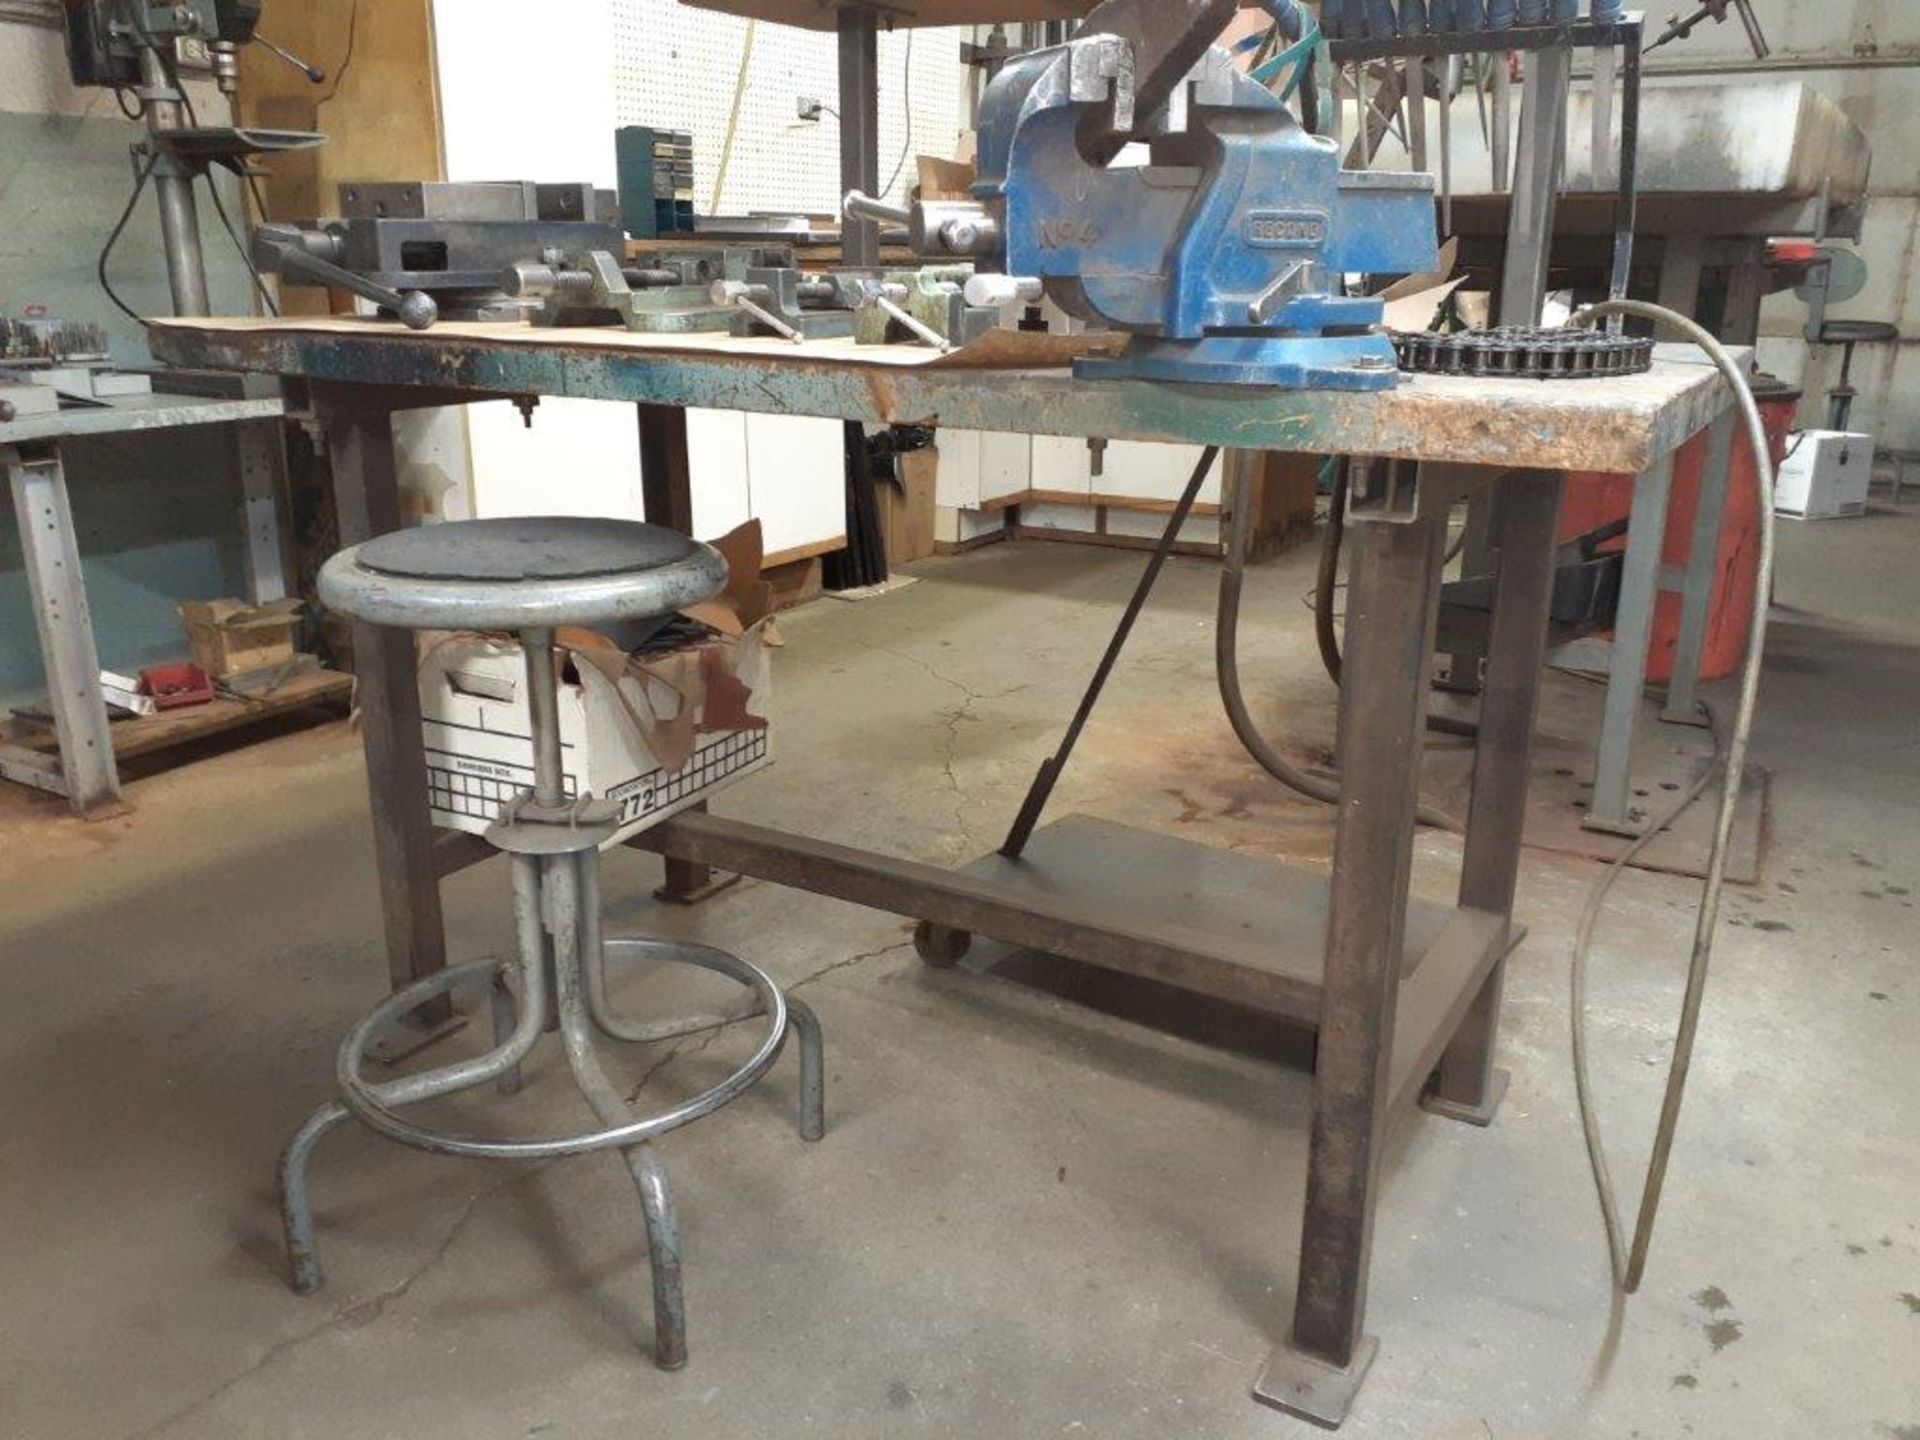 Steel Work Table, c/w 4" RECORD Vise & Stool